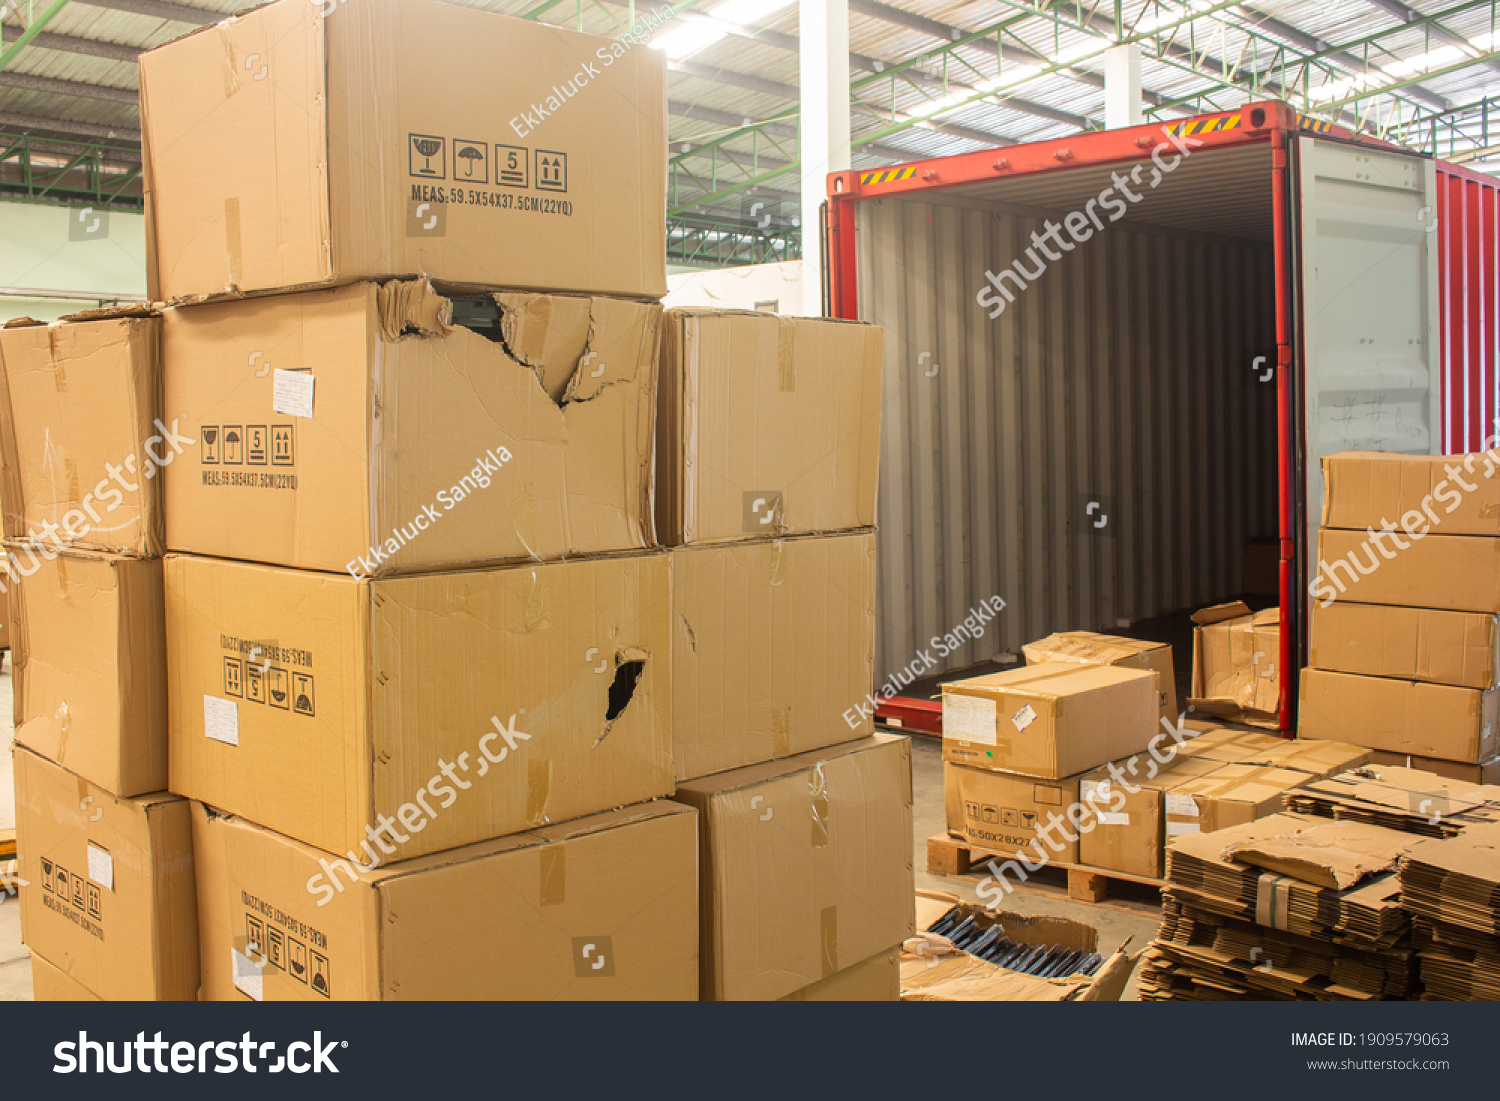 unloading carton from container and carton damage from loading or transport process.  #1909579063